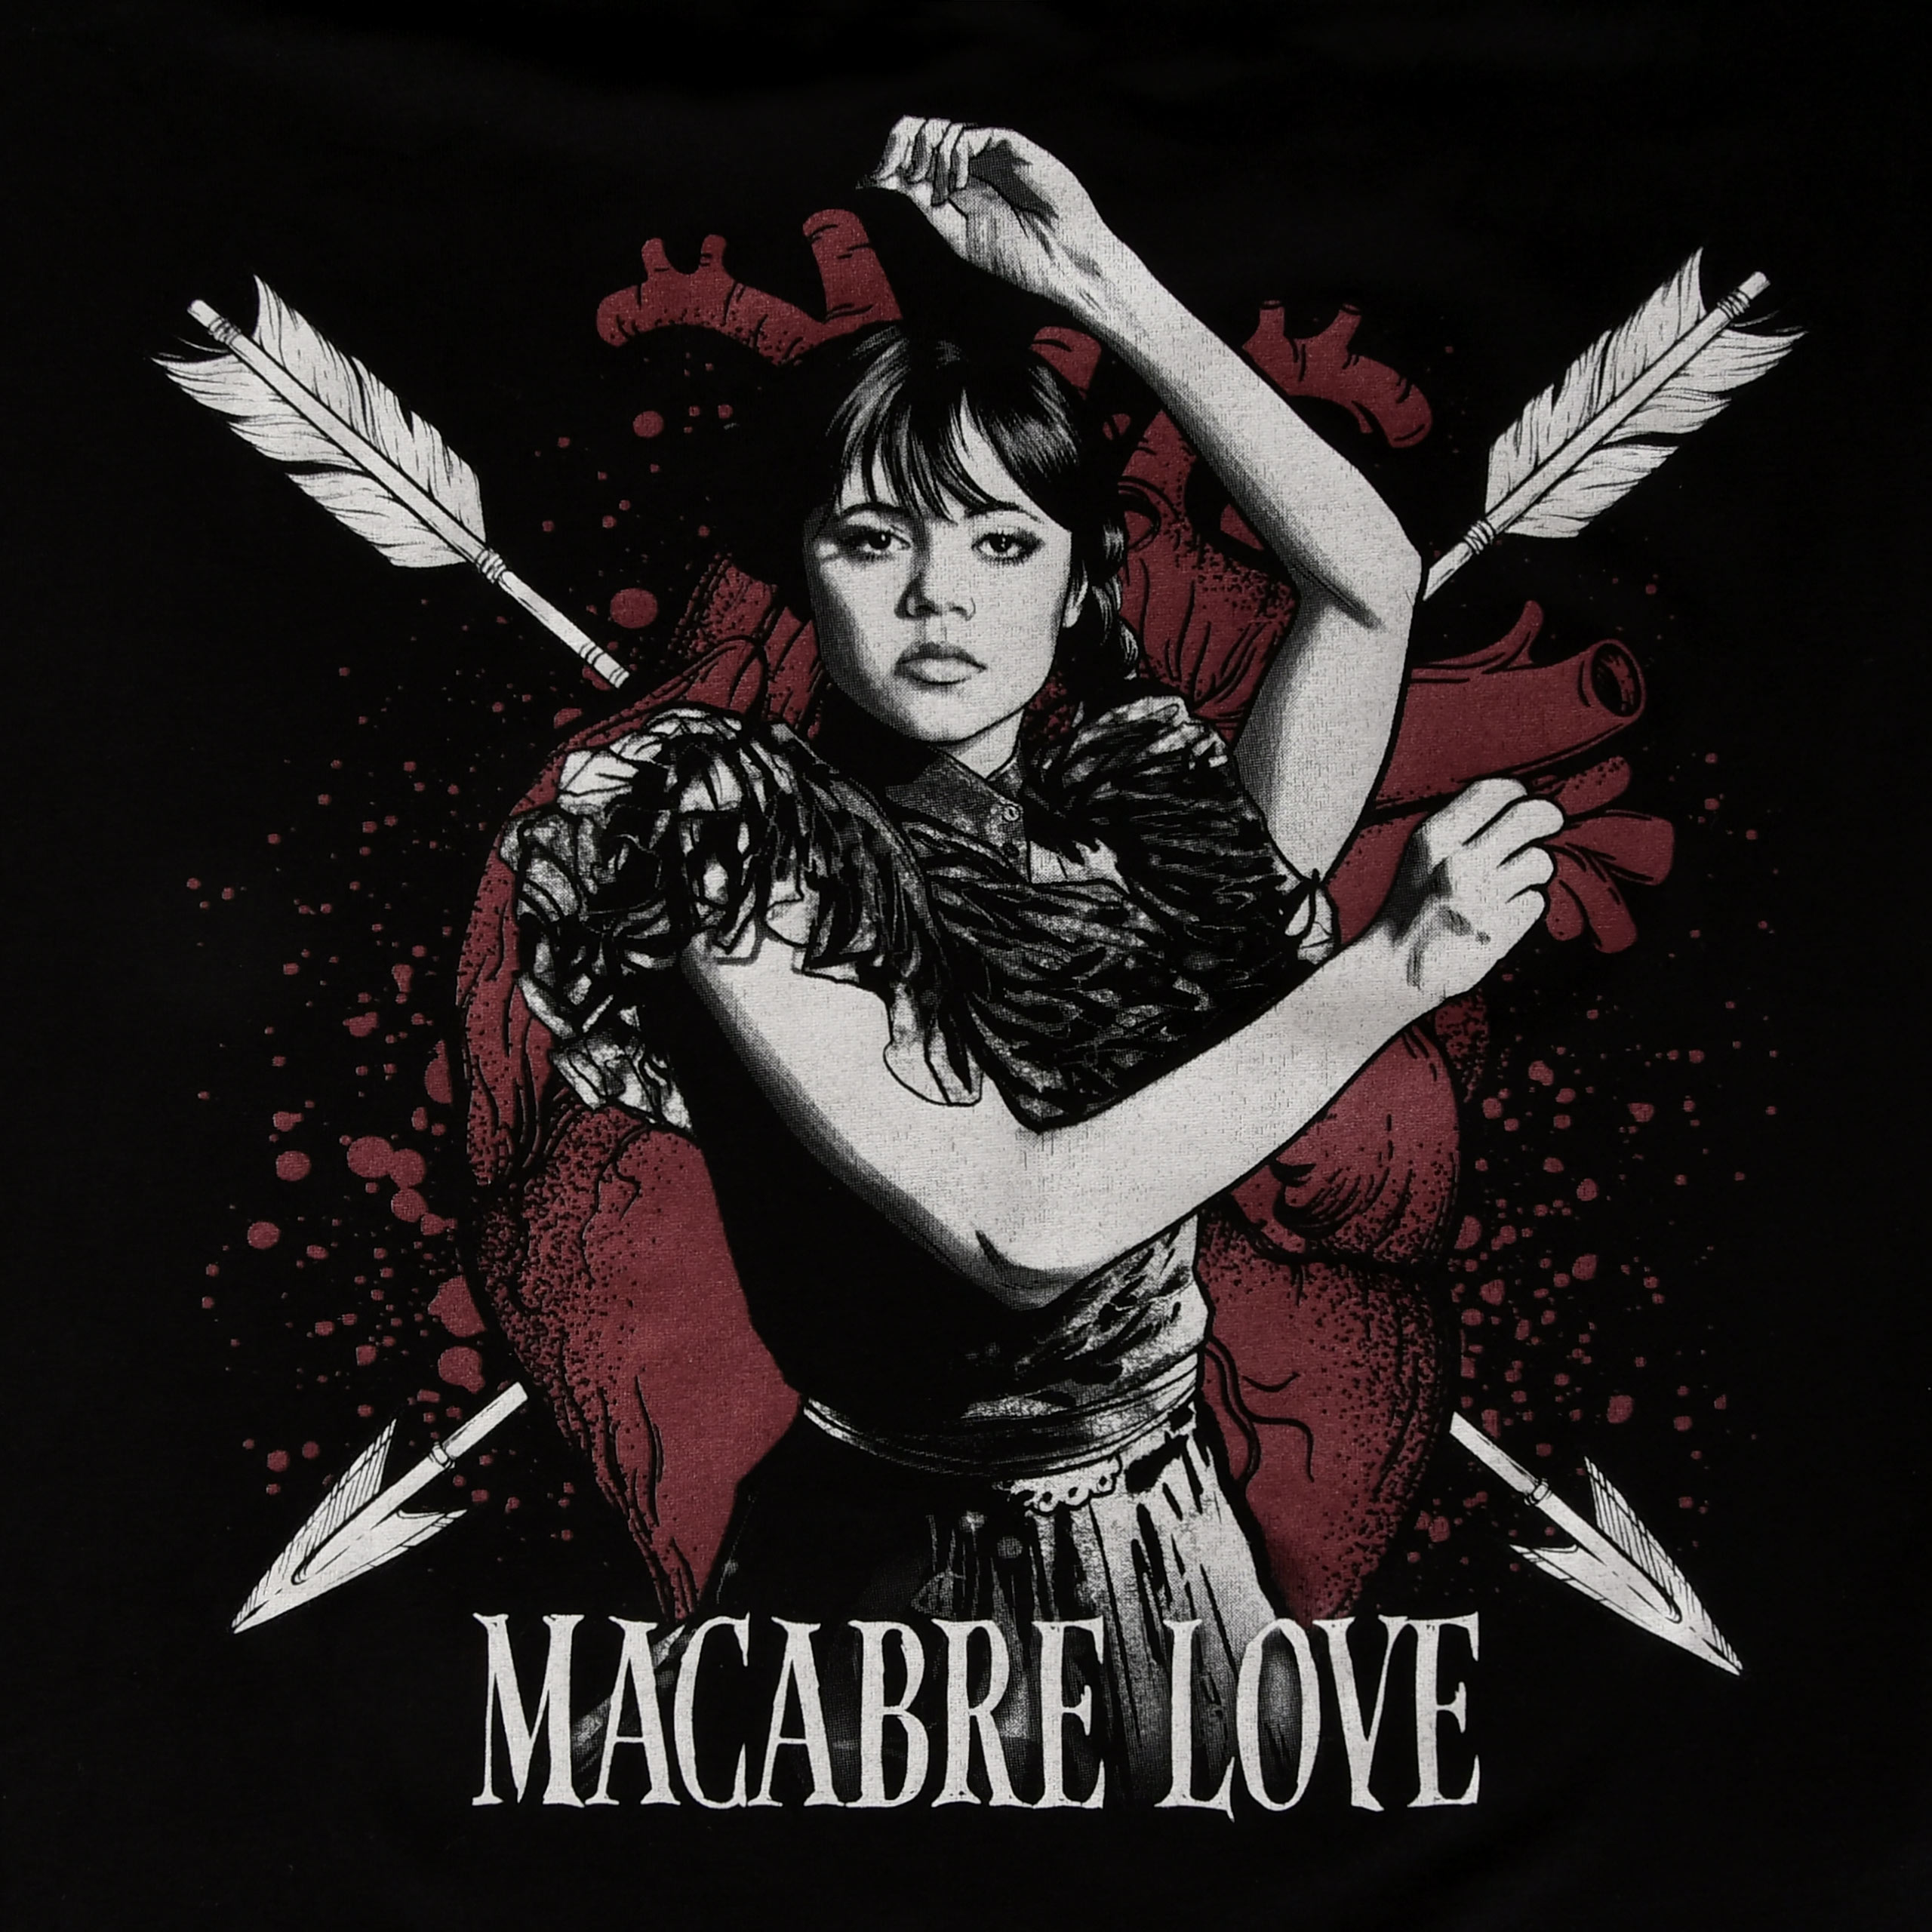 Wednesday - Macabre Love T-shirt with Butterfly Sleeves